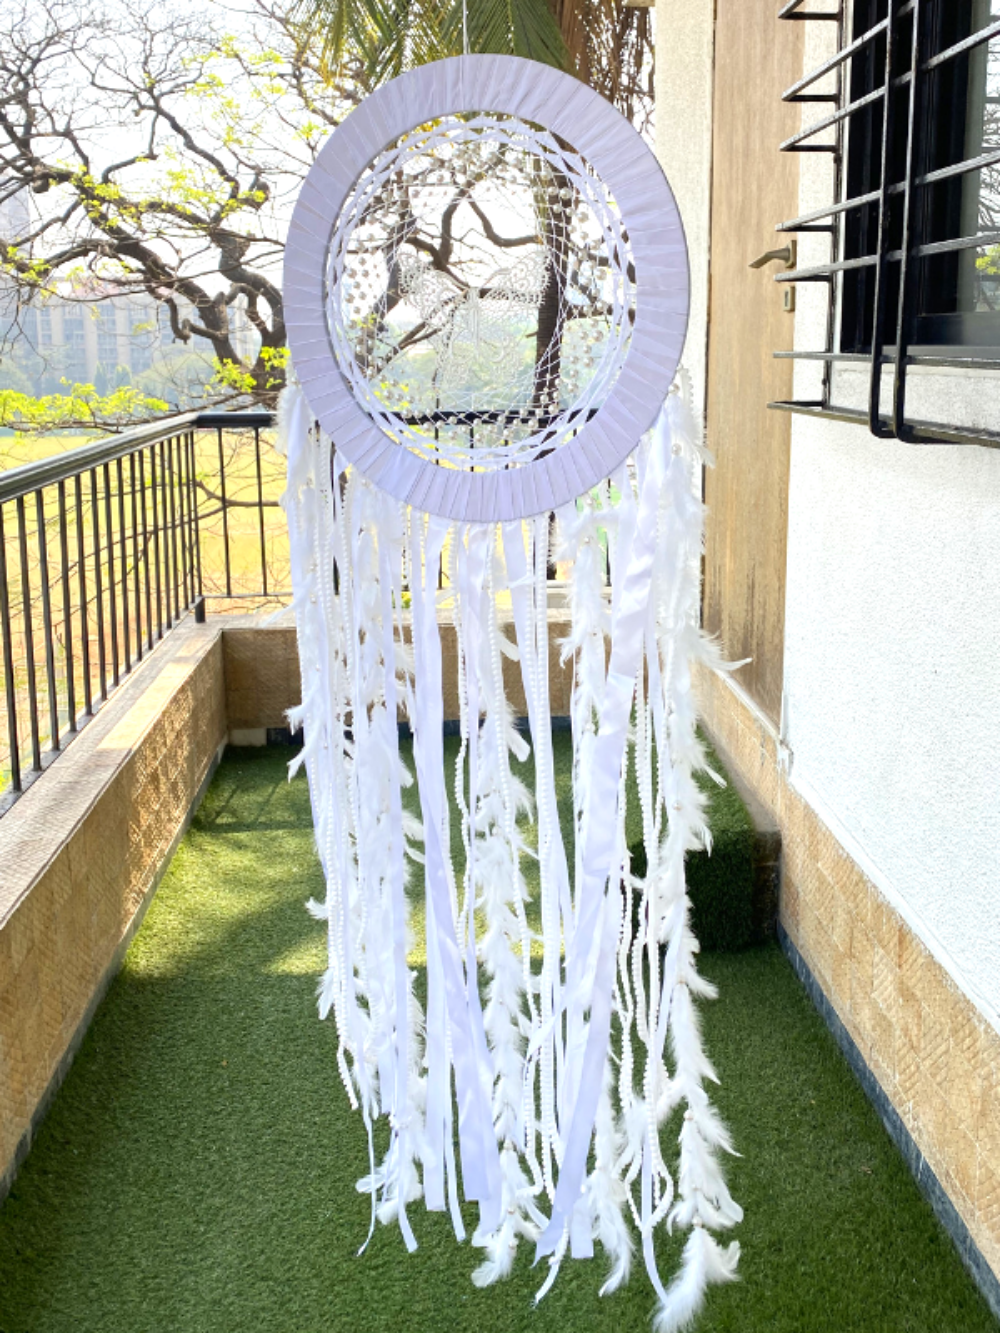 Big White Butterfly (18 inch) Large  Dream Catcher